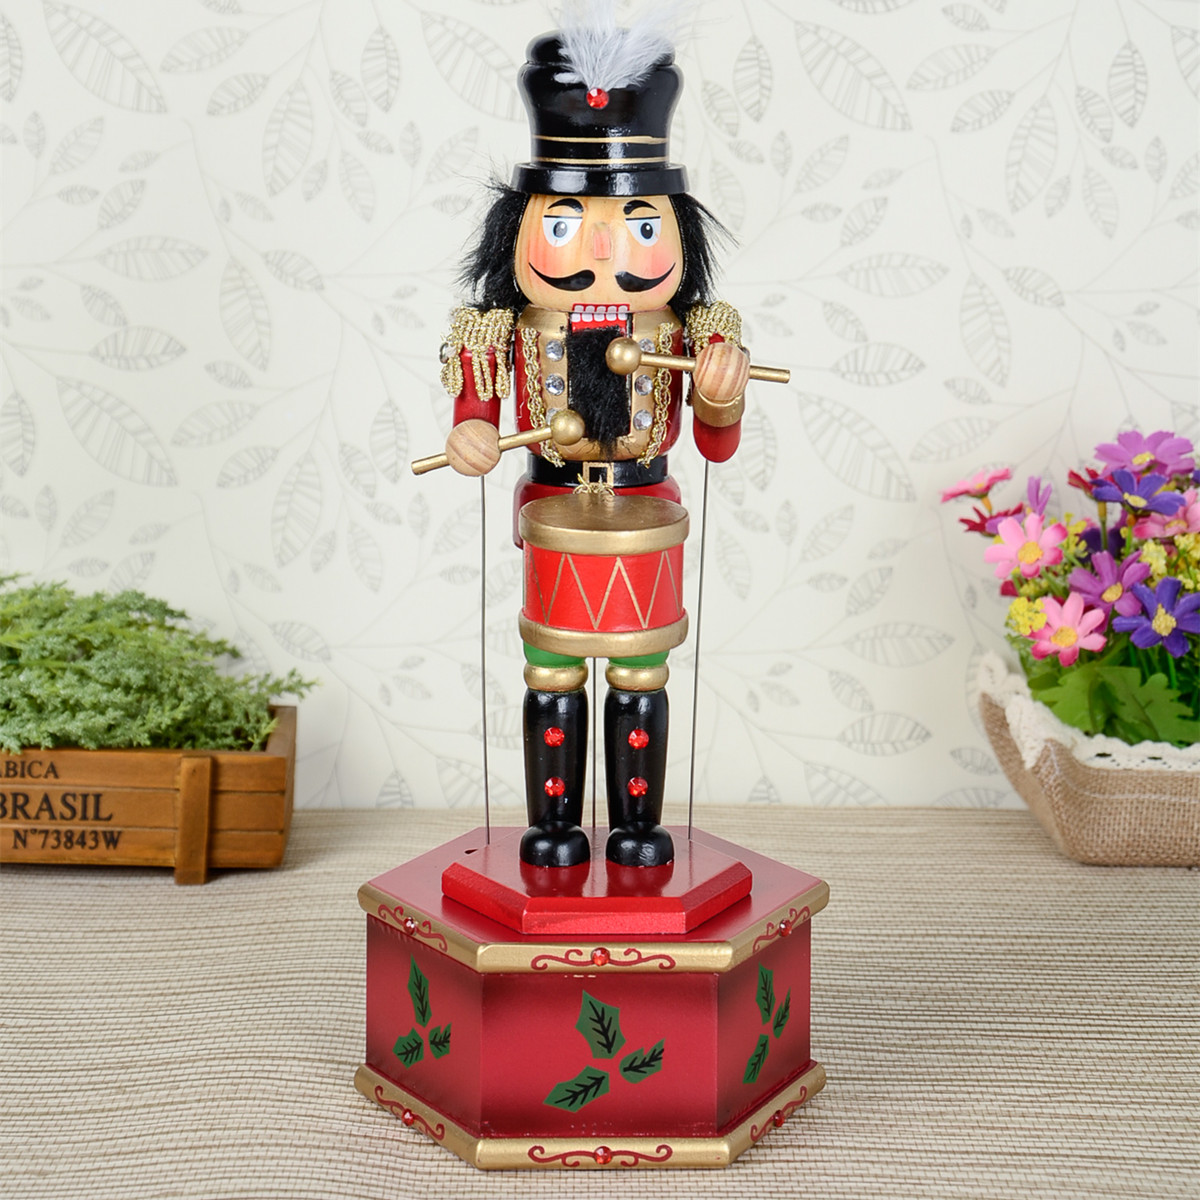 32cm-Wooden-Music-Box-Nutcracker-Doll-Soldier-Vintage-Handcraft-Decoration-Christmas-Gifts-1398446-2